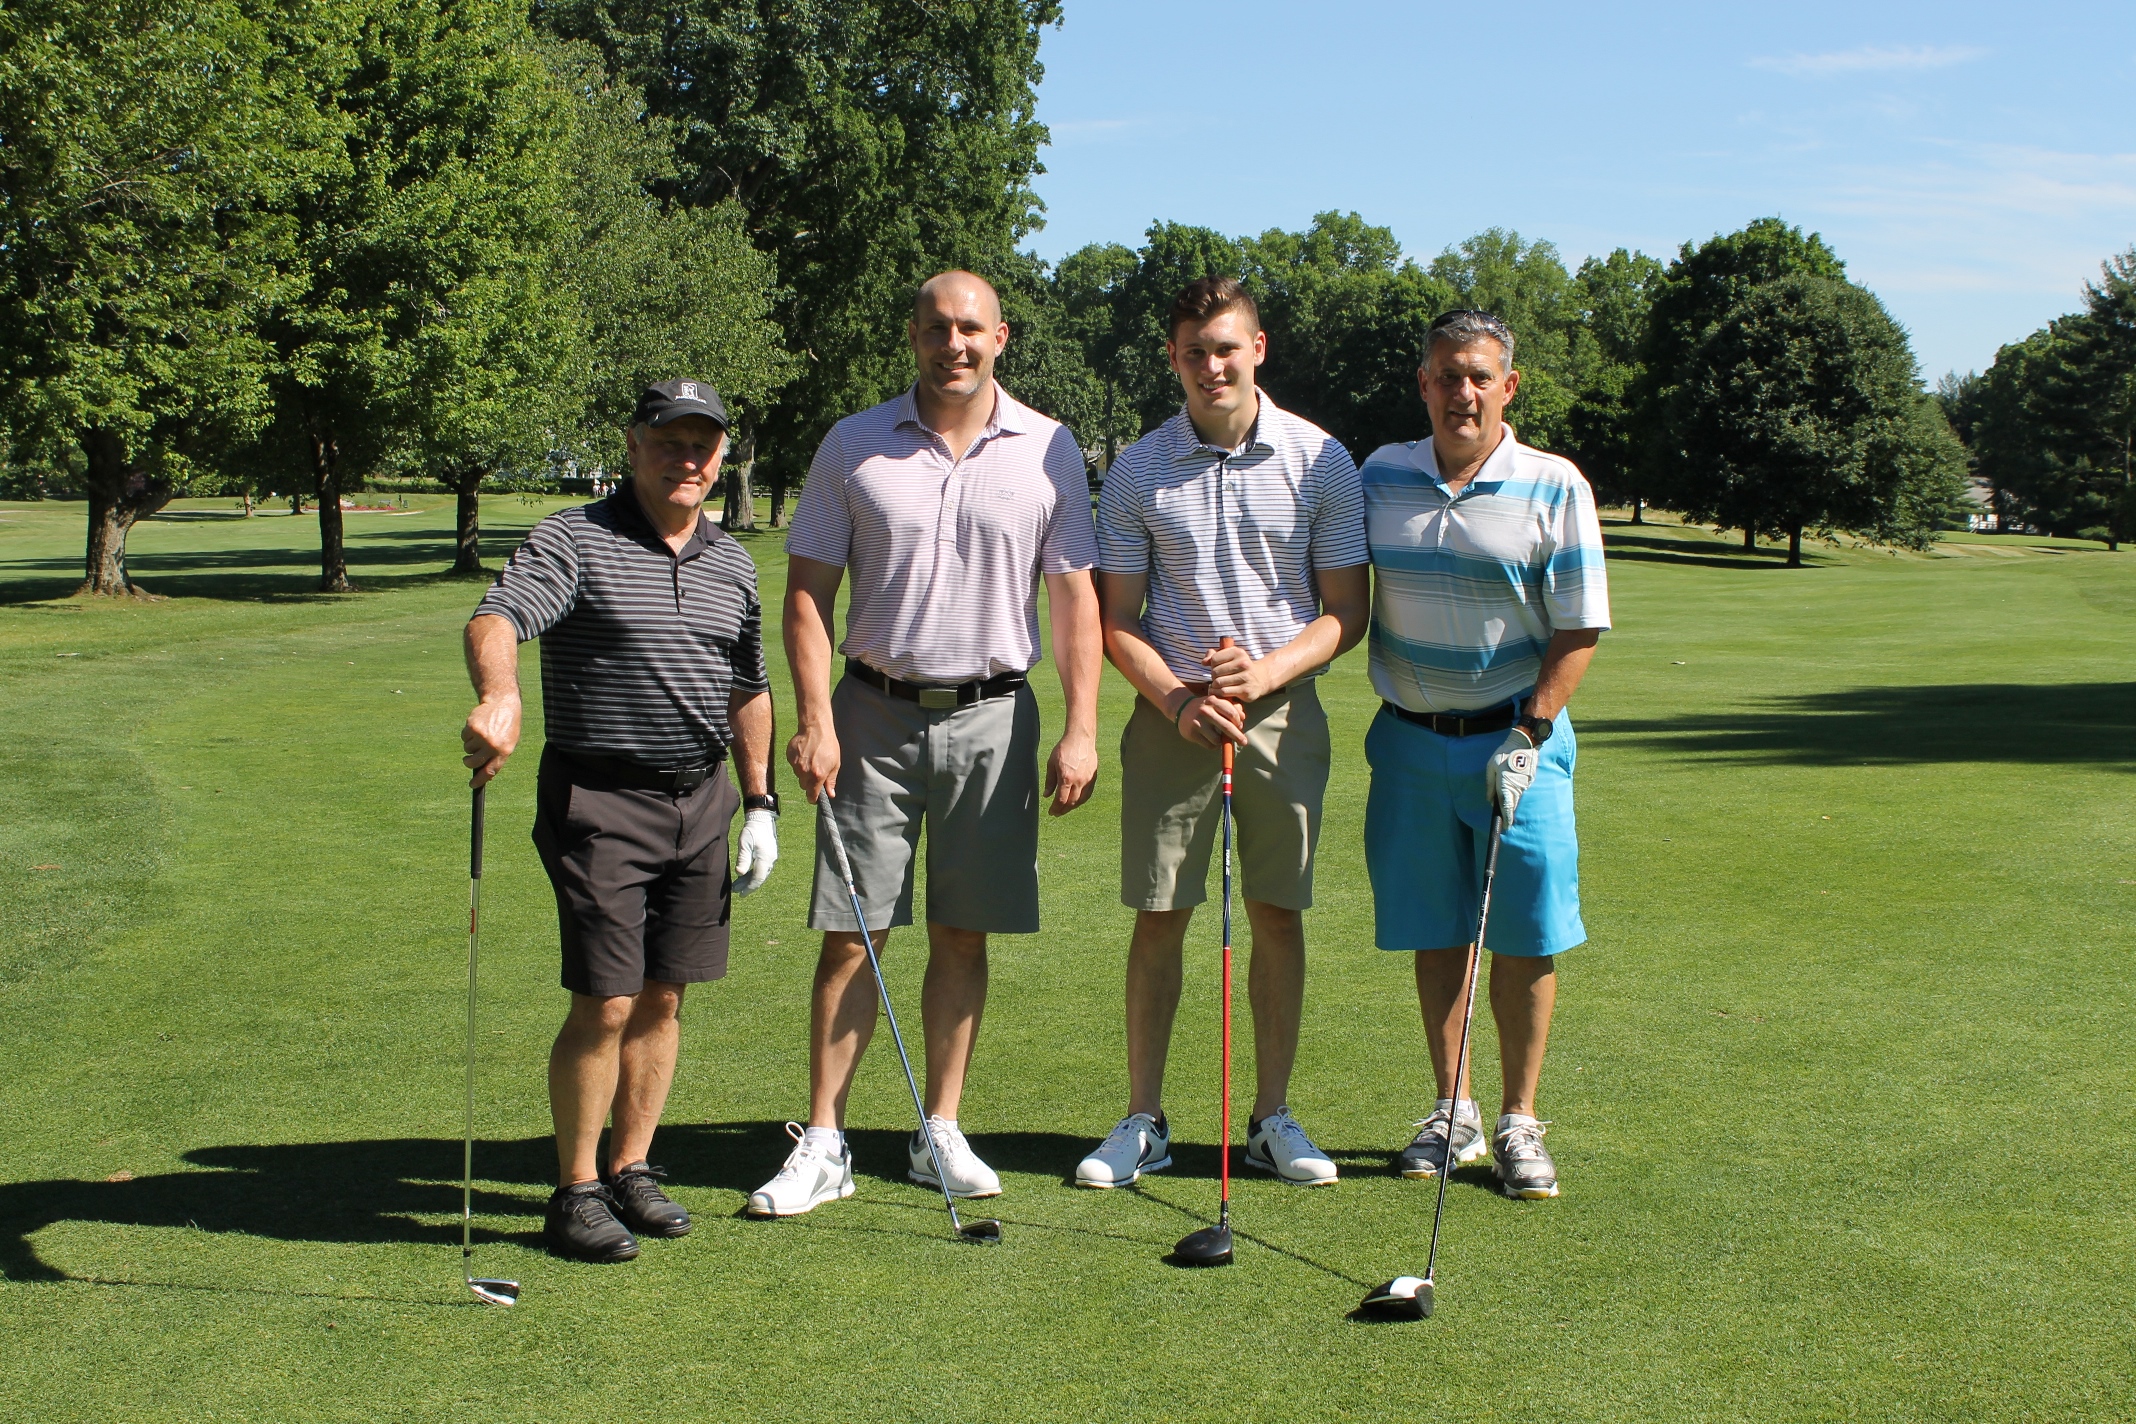 The Atlantic, Tomorrow’s Office foursome at Hospice of Westchester’s 16th Annual Golf Invitational at Westchester Hills Golf Club in White Plains on Tuesday, June 19.